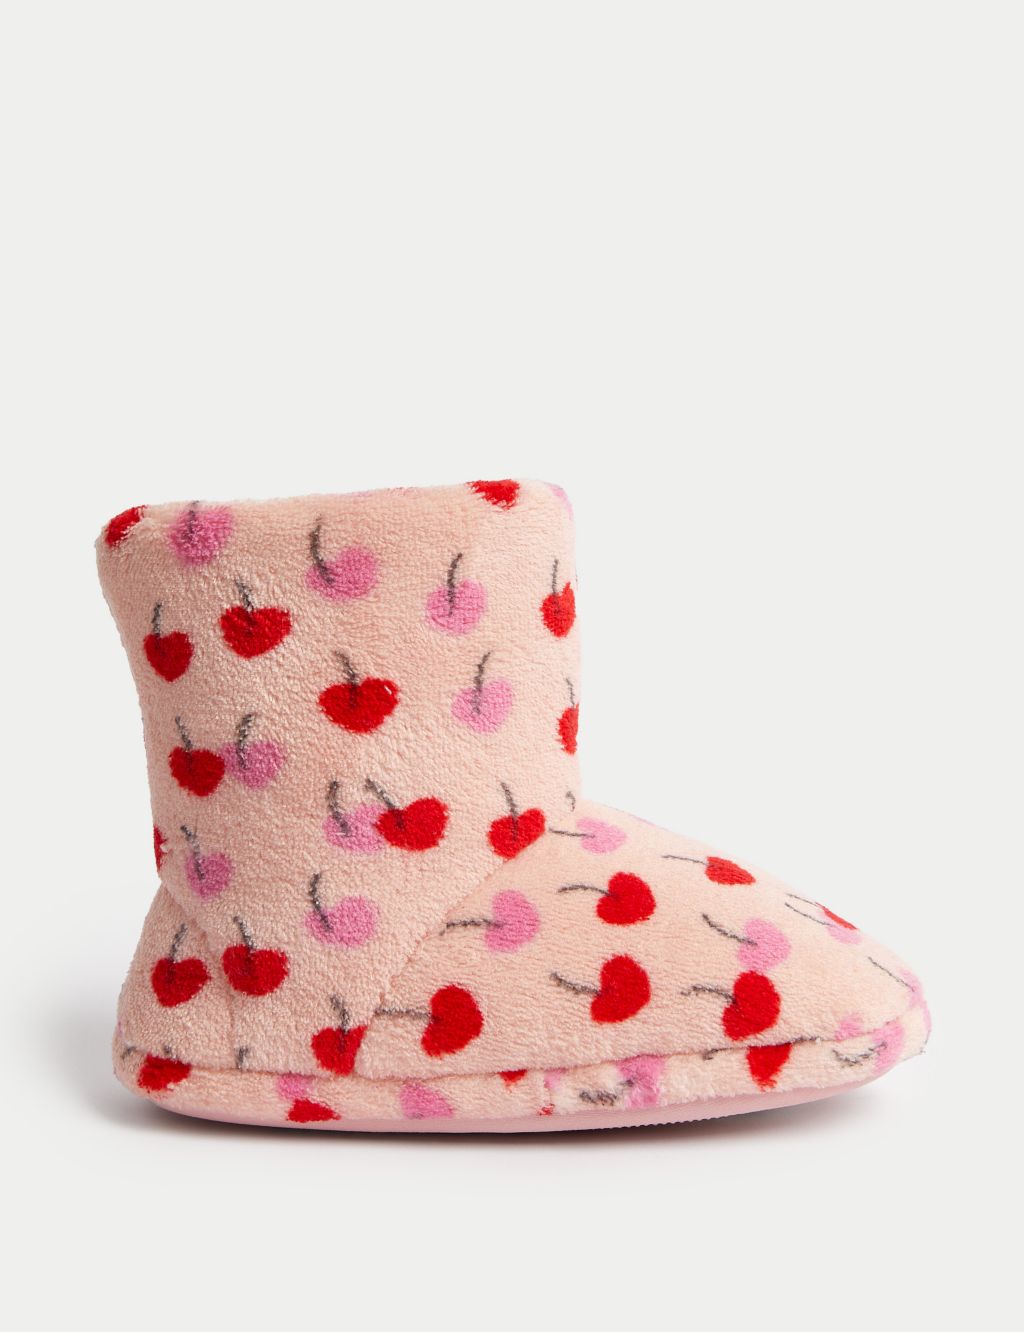 Kids' Cherry Slipper Boots (4 Small - 6 Large) image 1